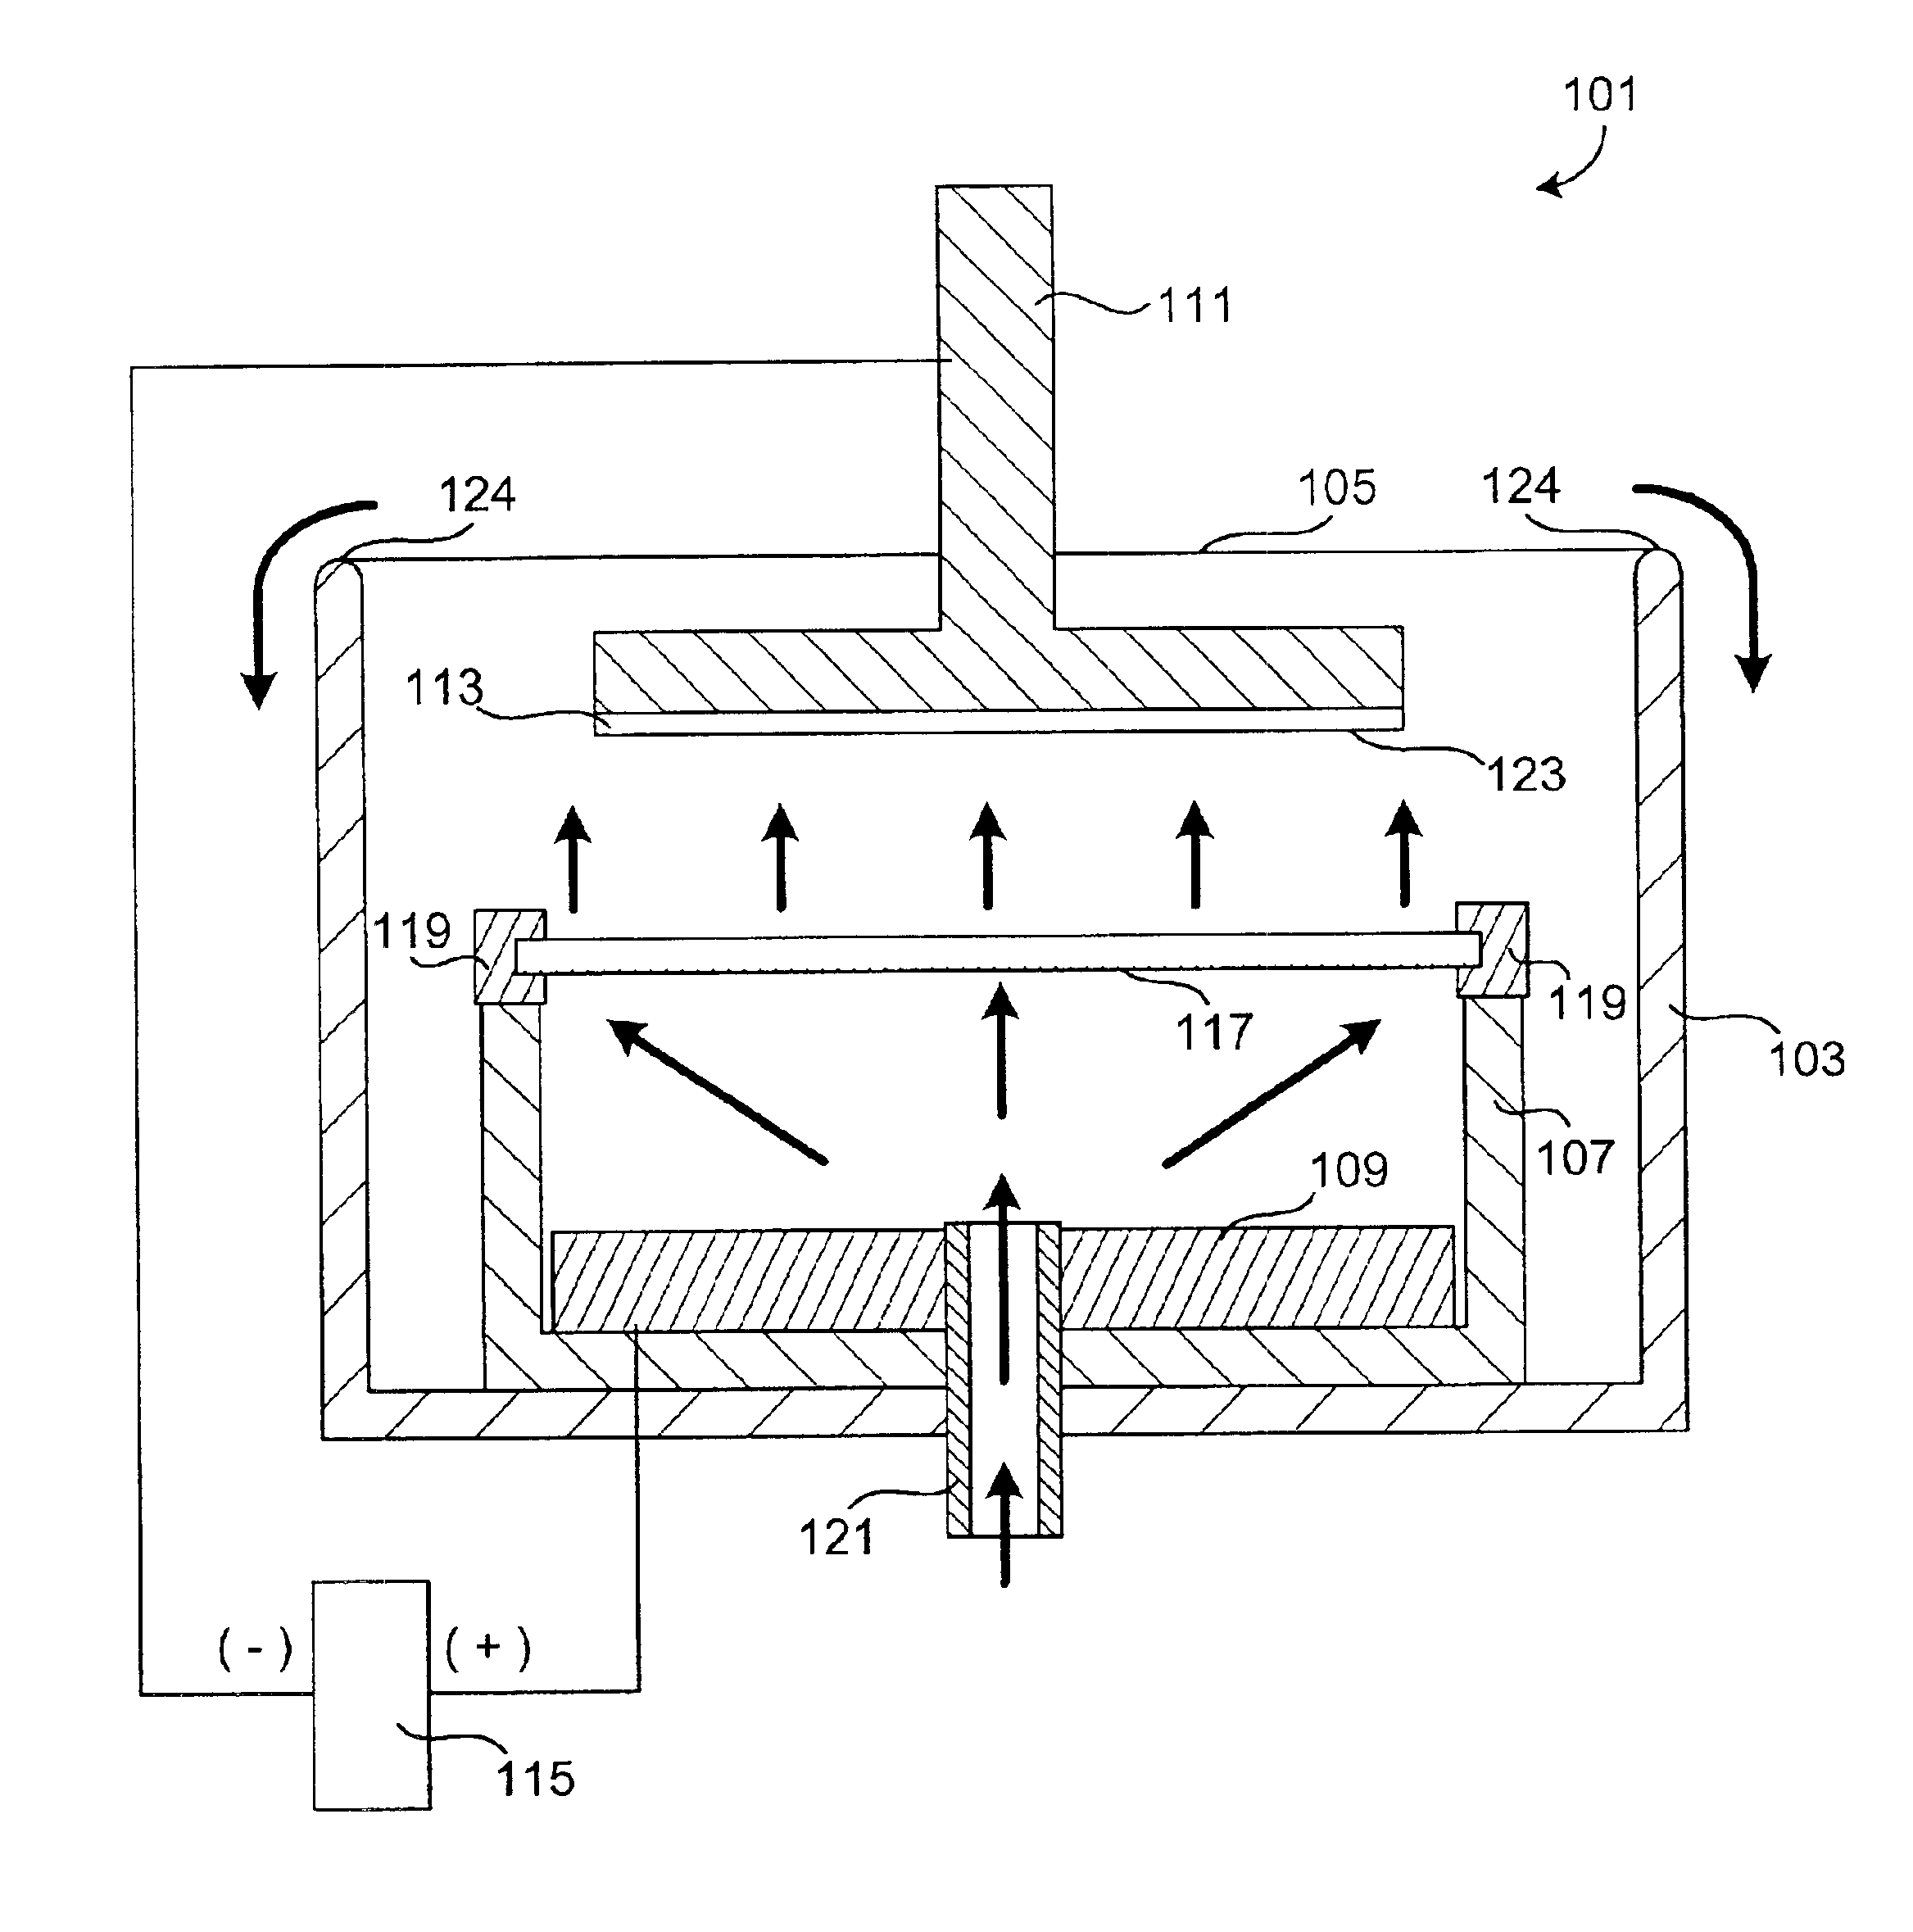 Methods and apparatus for controlling electrolyte flow for uniform plating